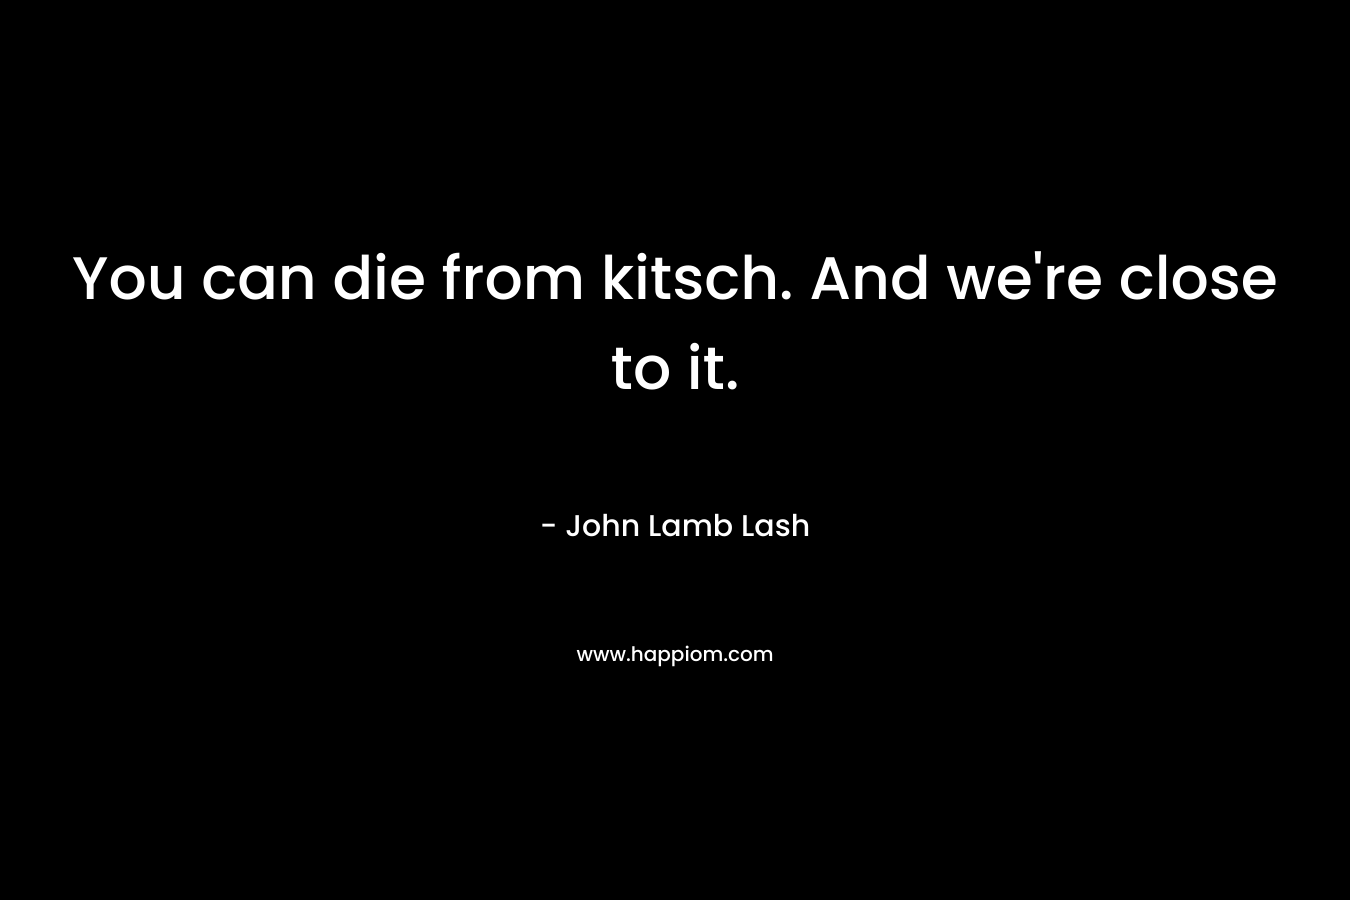 You can die from kitsch. And we’re close to it. – John Lamb Lash